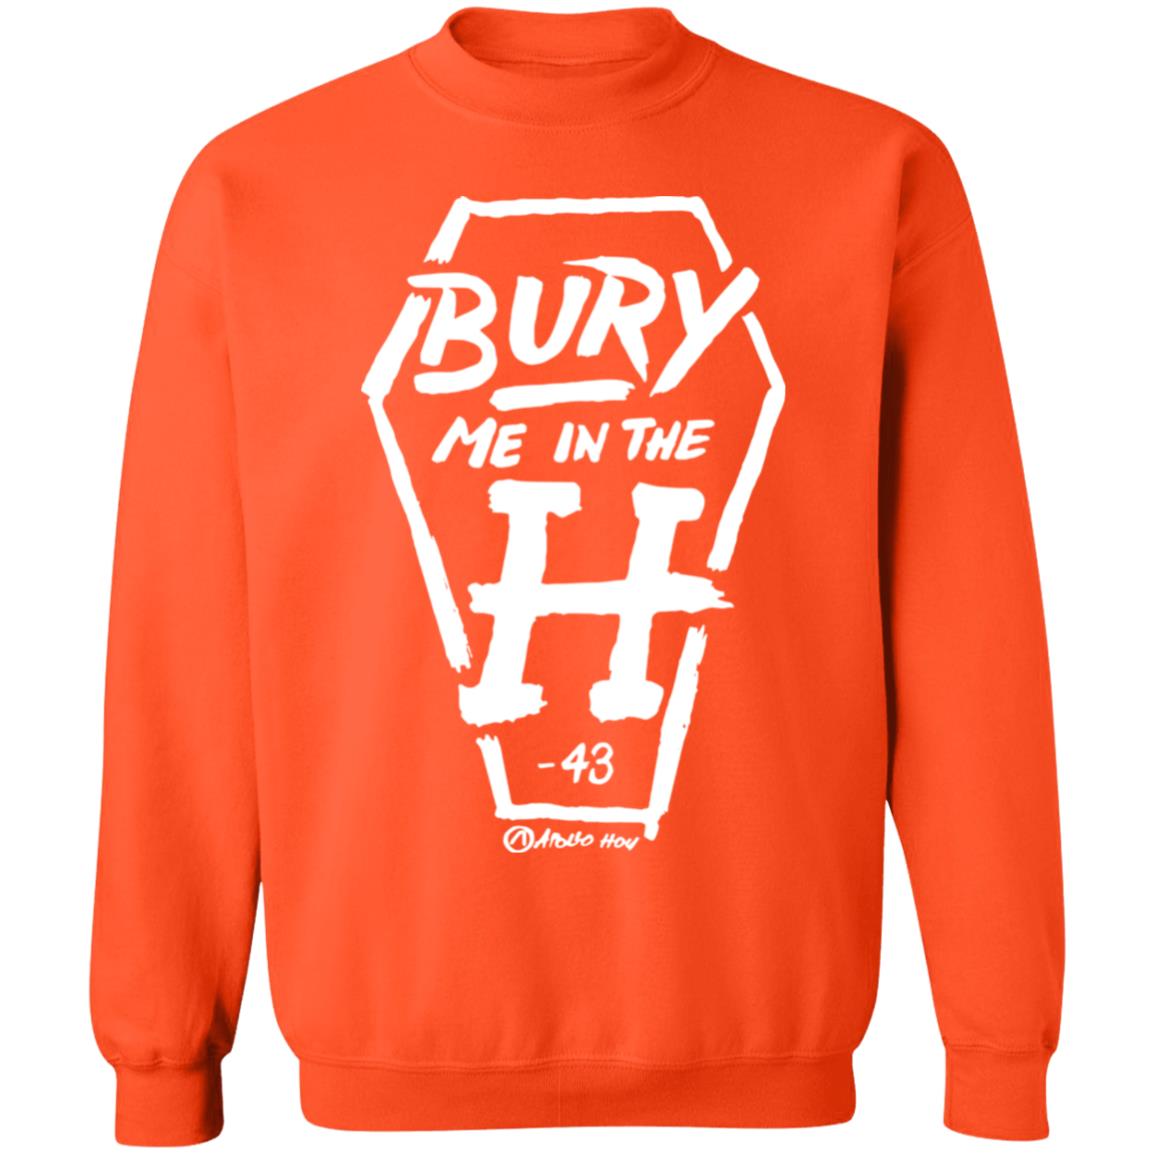 Bury Me In The H Coffin Variant Shirt 2